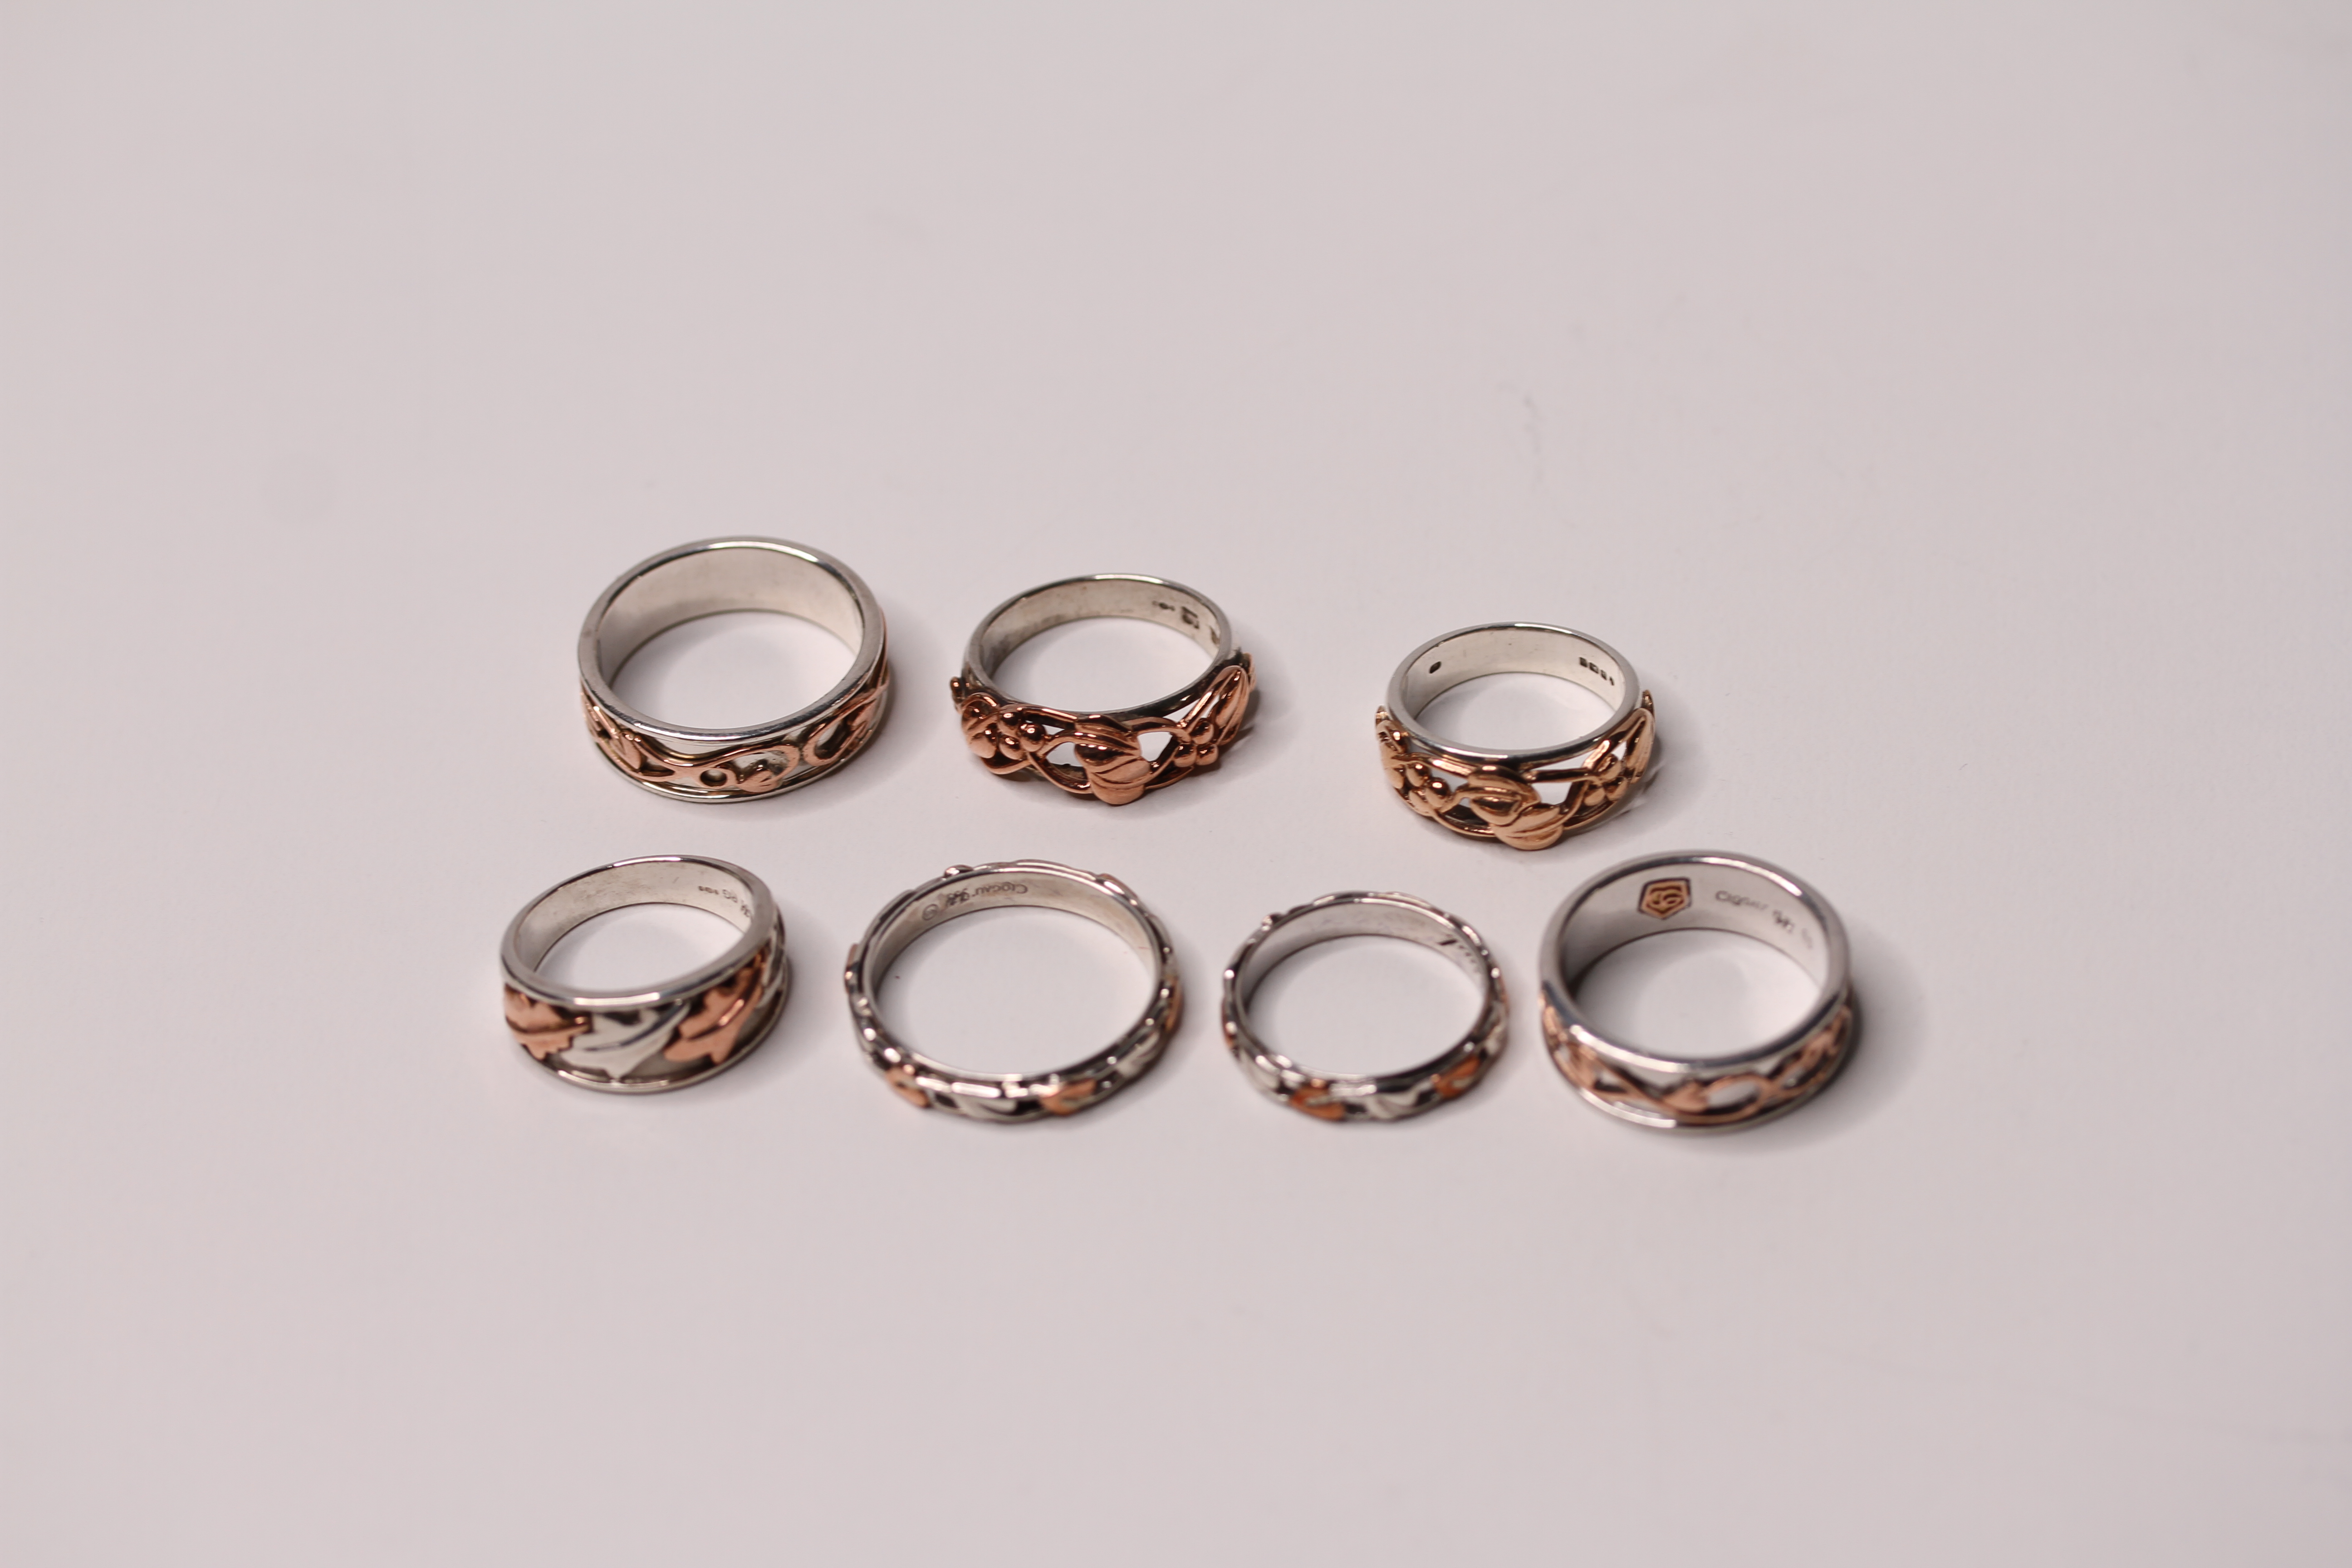 *TO BE SOLD WITHOUT RESERVE*A collection of 7 clogau rings